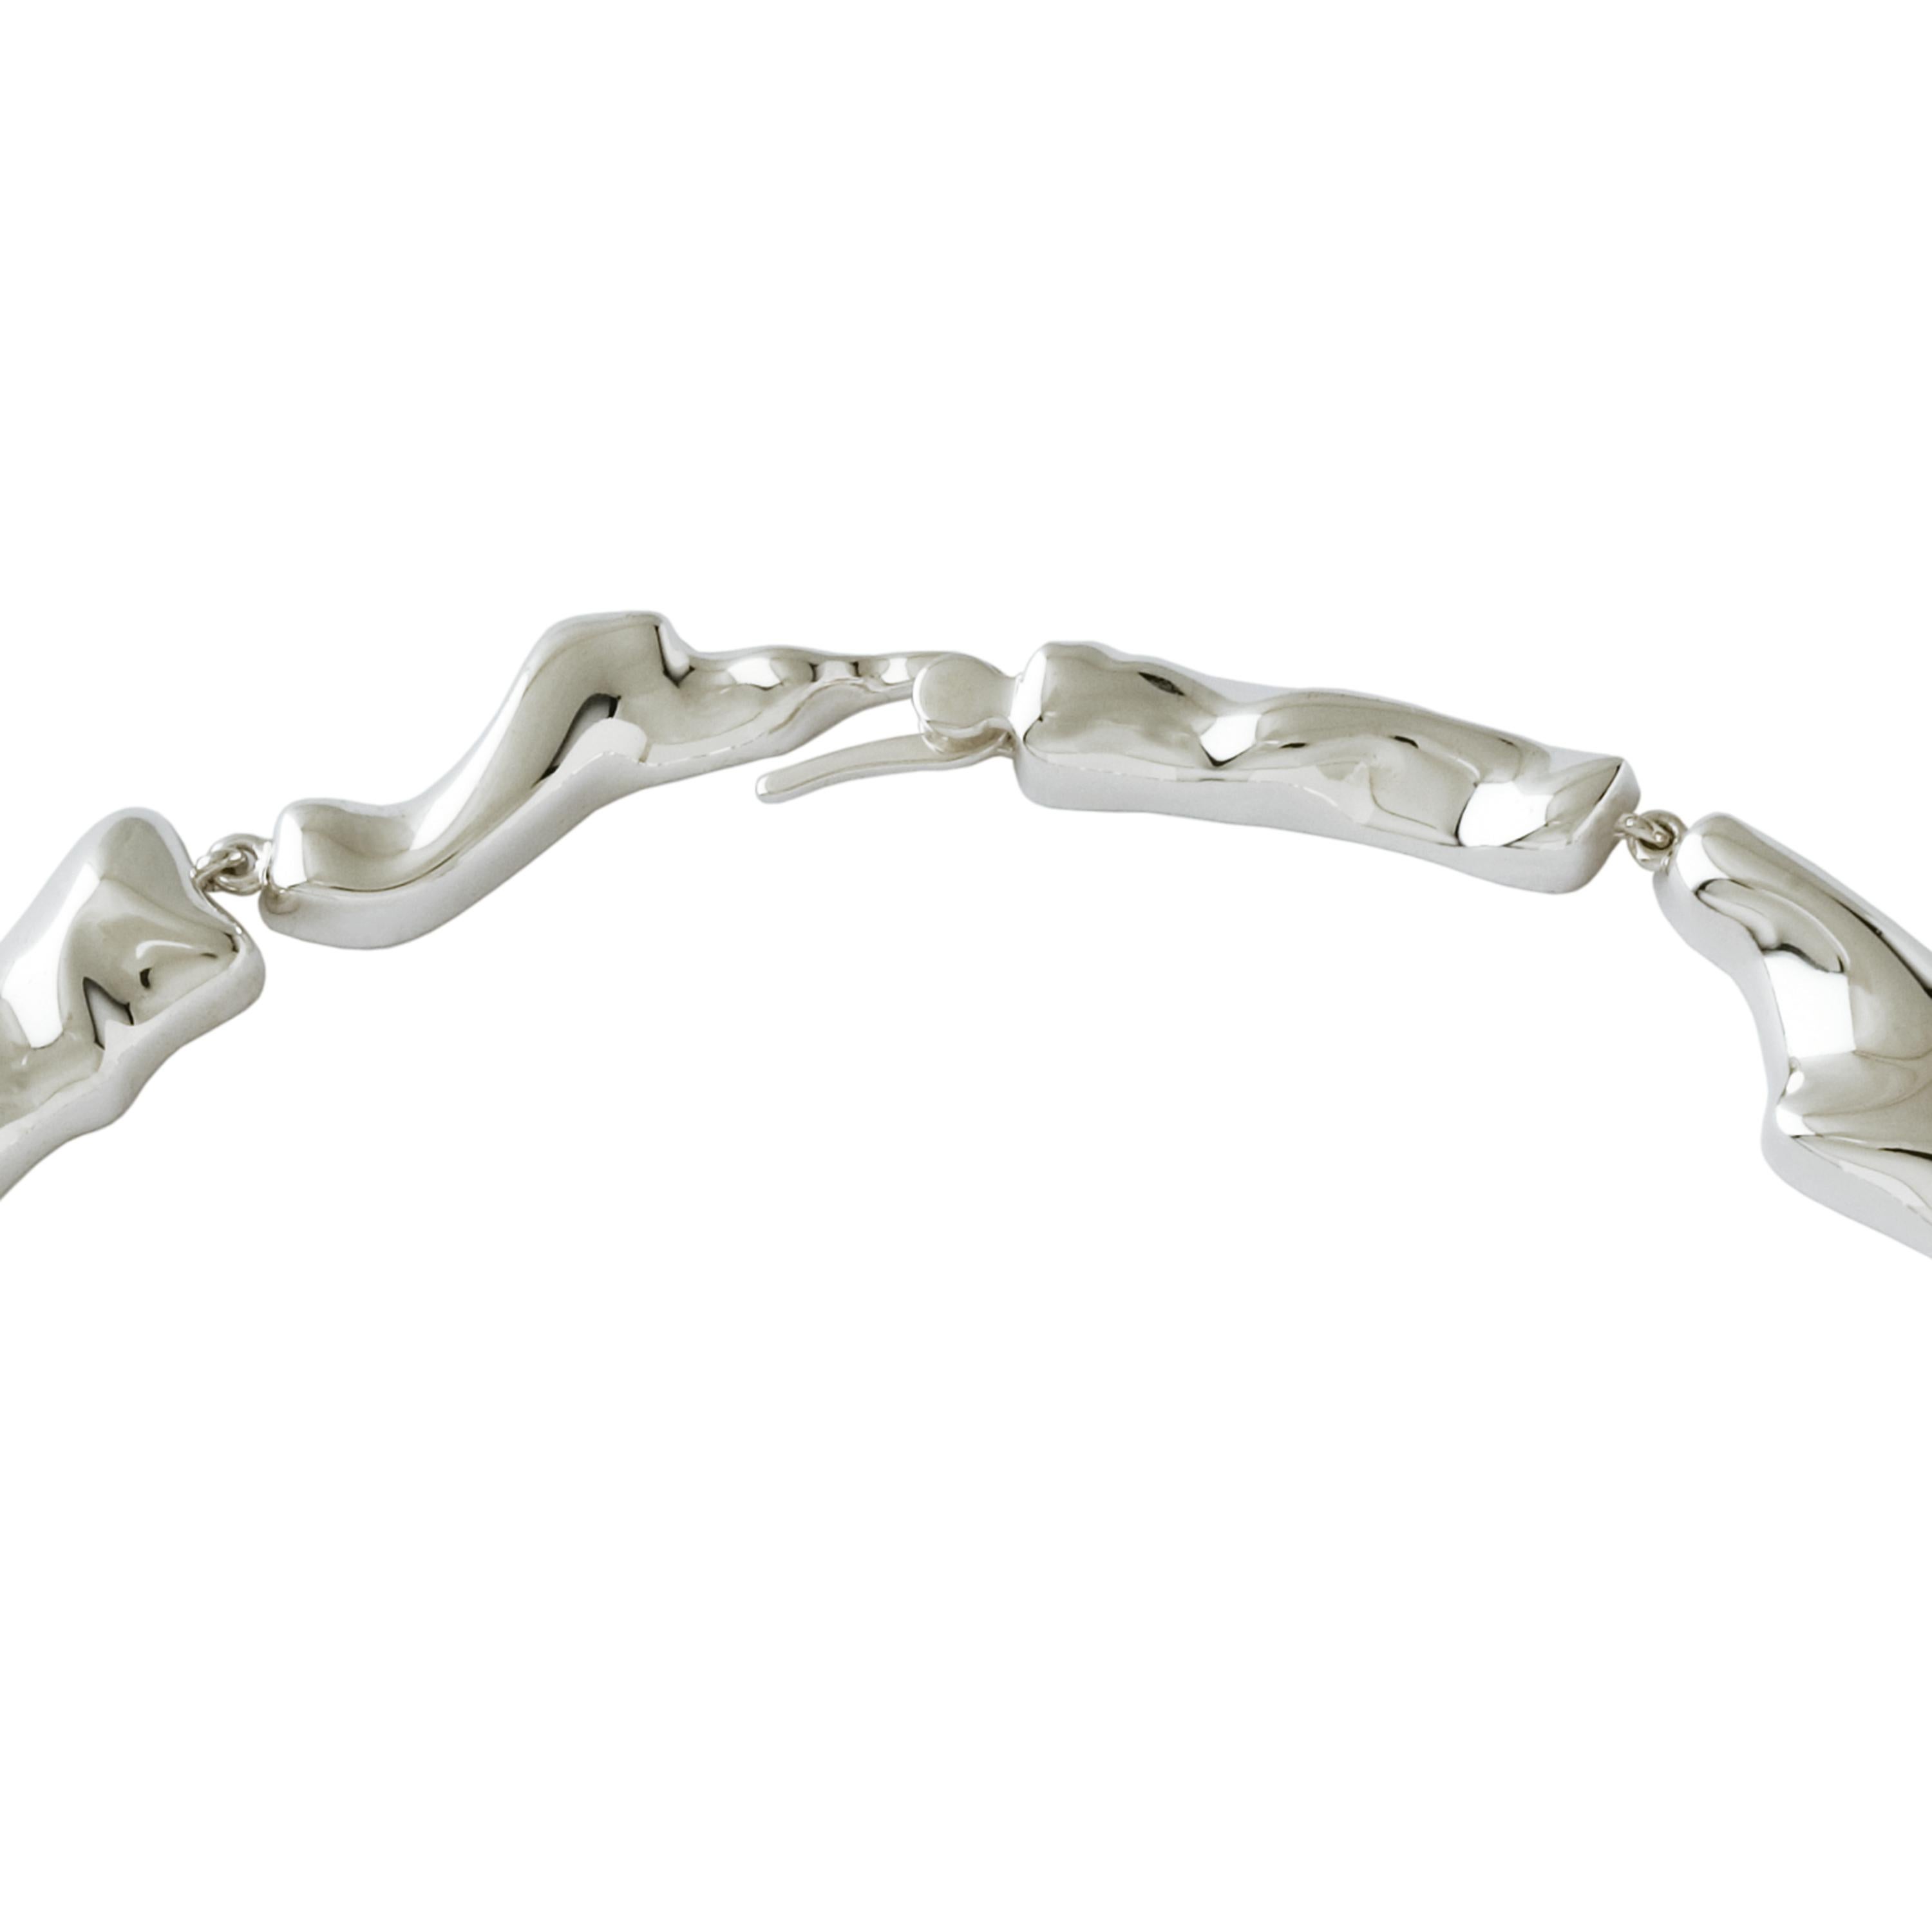 Made by hand in Nathalie Jean's Milan atelier in limited edition, the Mercure Choker necklace is composed of 11 elements of varying dimensions in rhodium plated sterling silver. Clever hidden links allow the pieces to drape nicely around the neck.